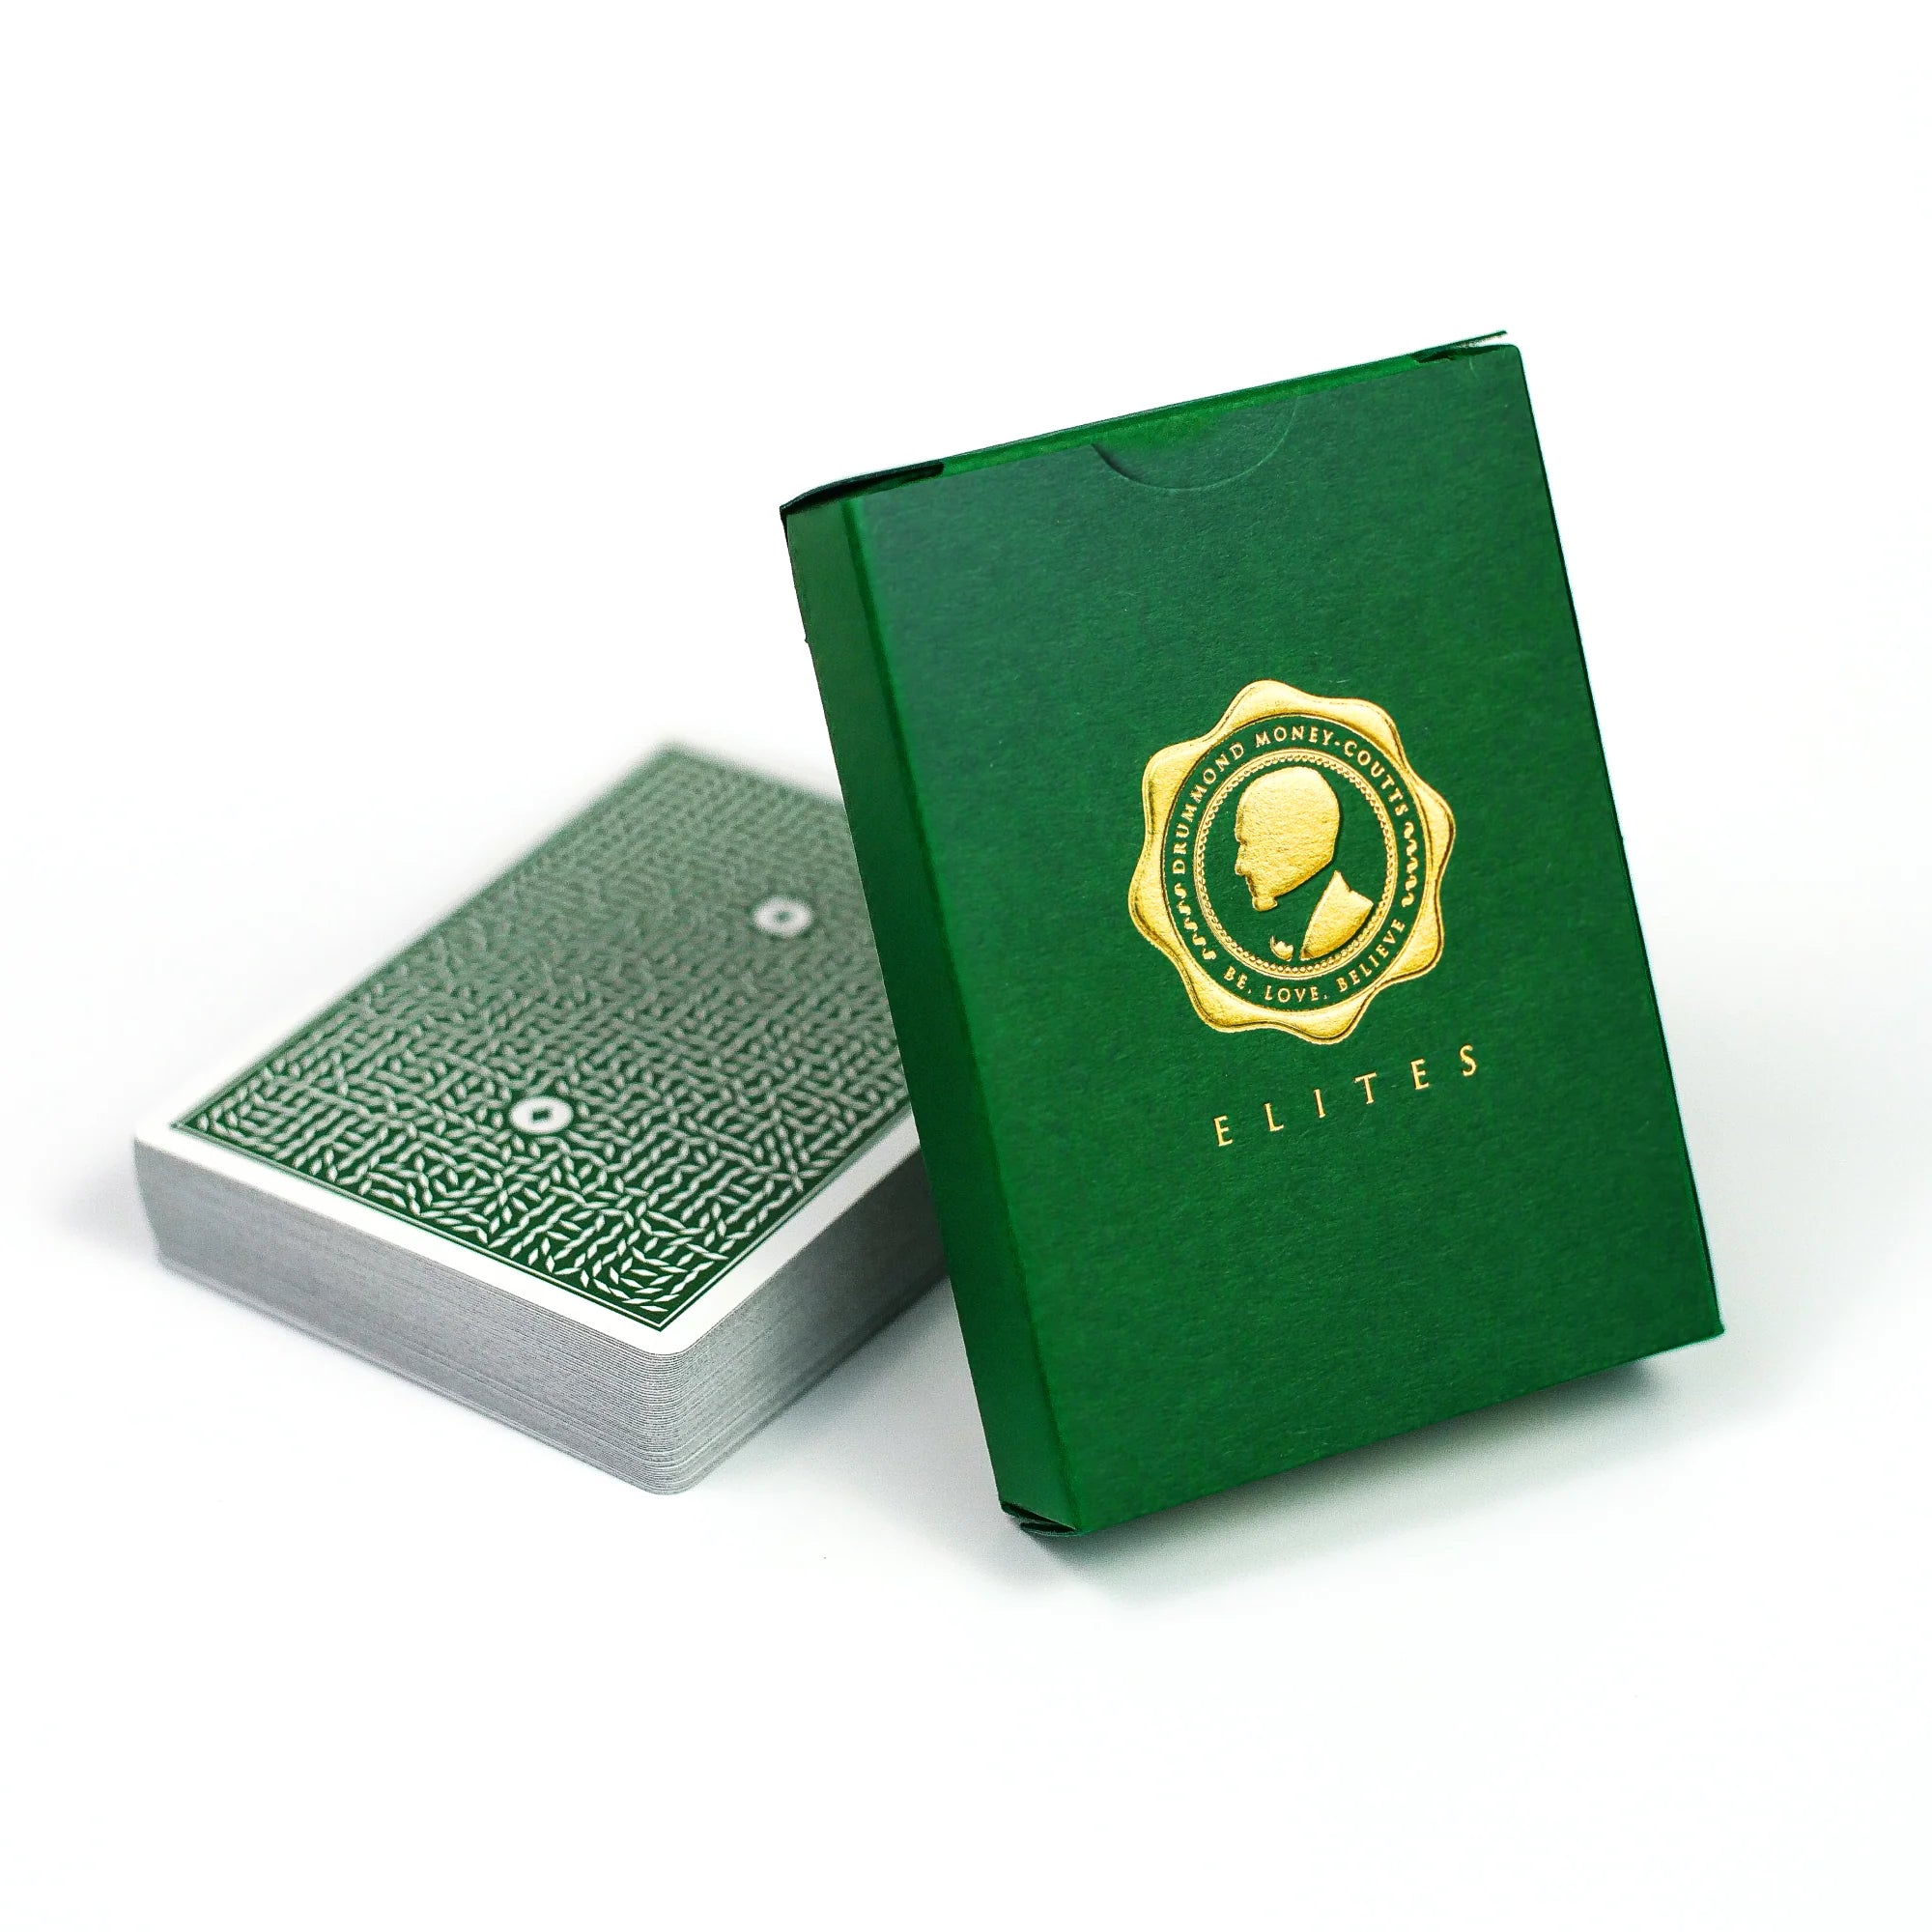 DMC ELITES V4 Marked Playing Cards (Forest Green)